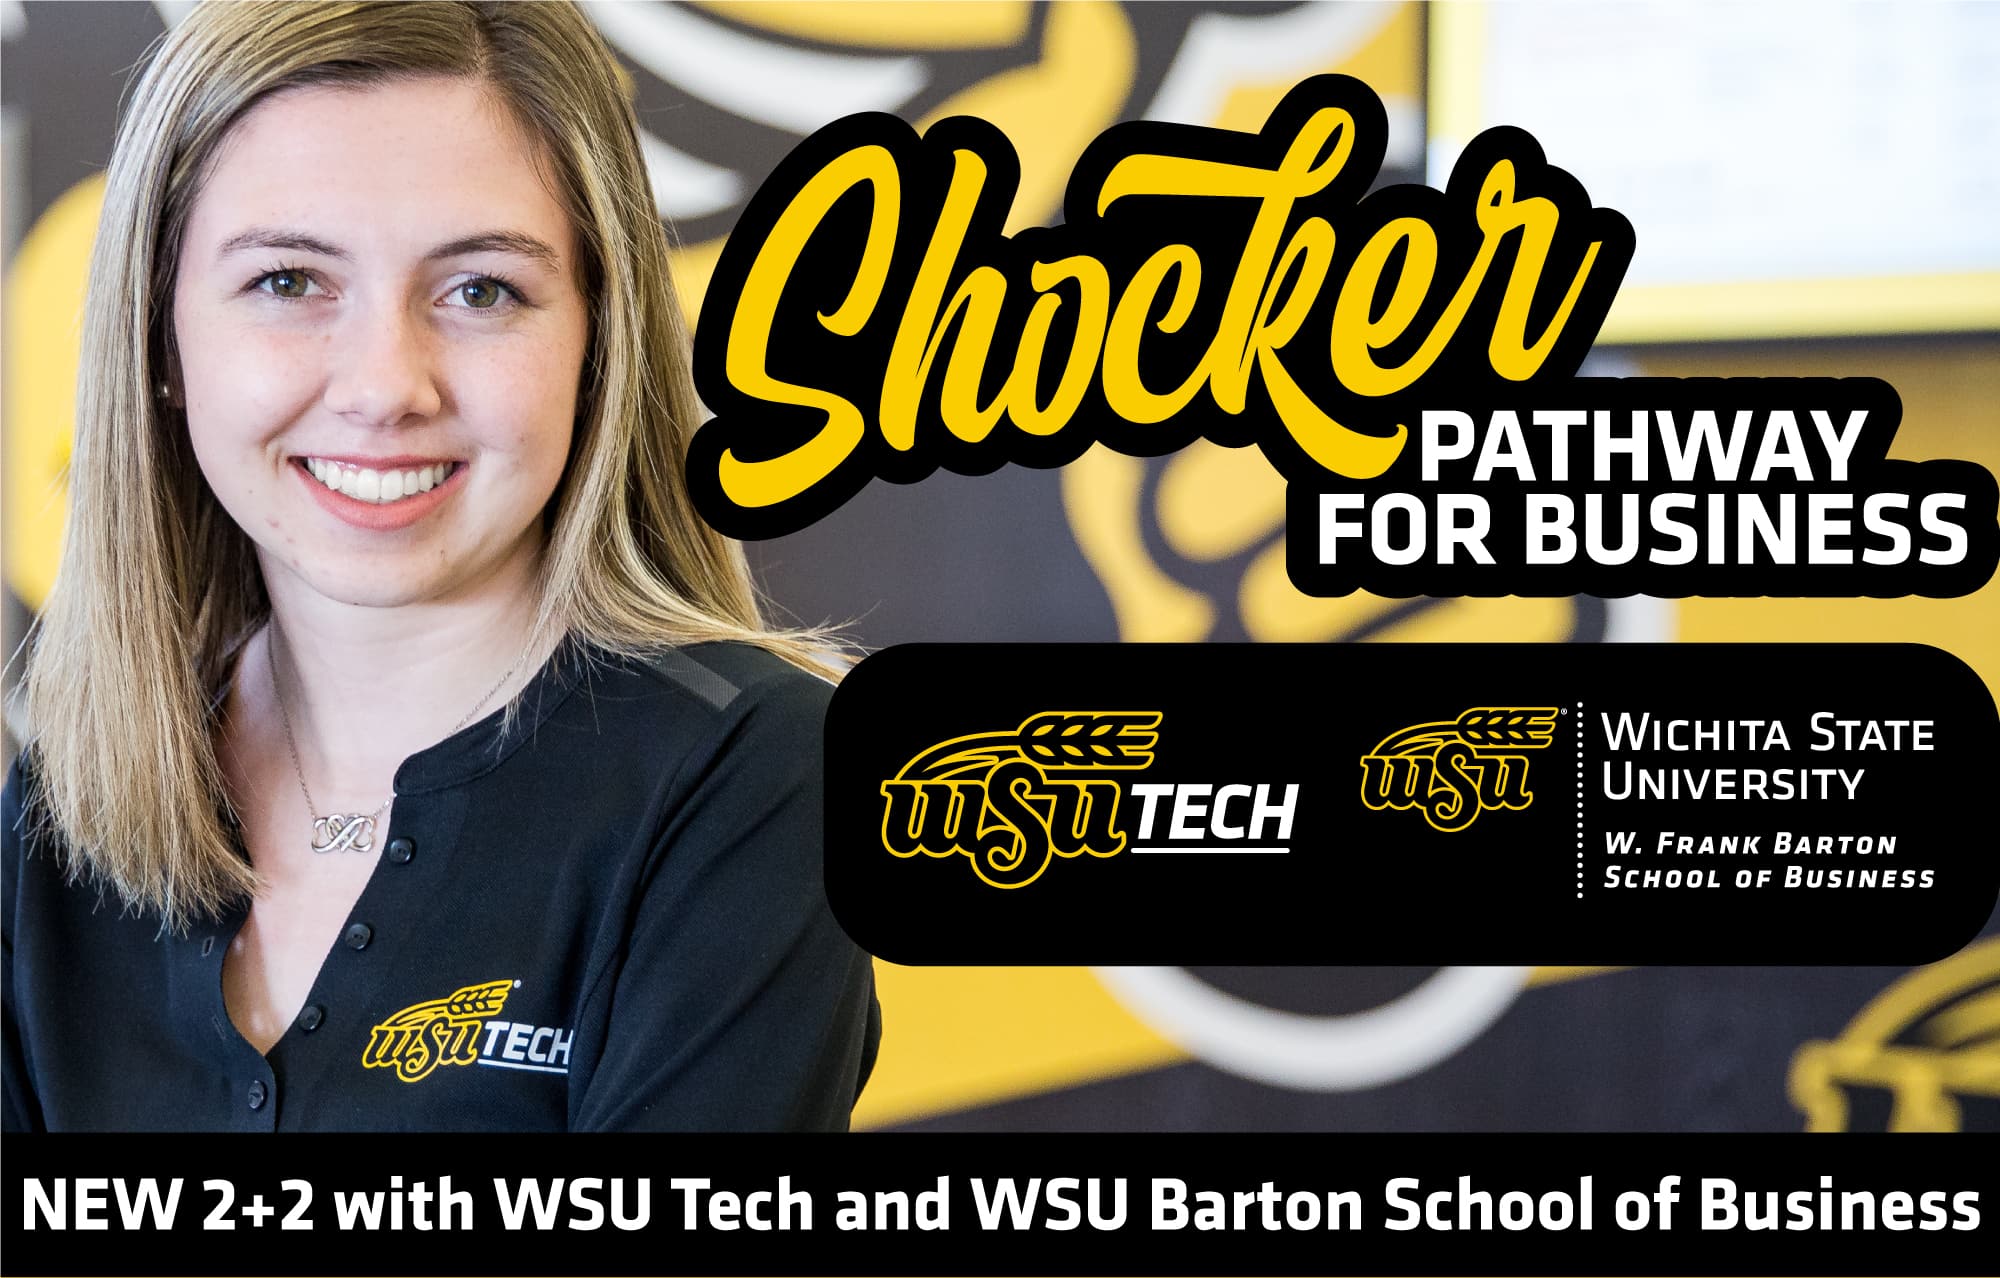 Shocker Pathway for Business. New 2+2 with WSUTECH and WSU Barton School of Business